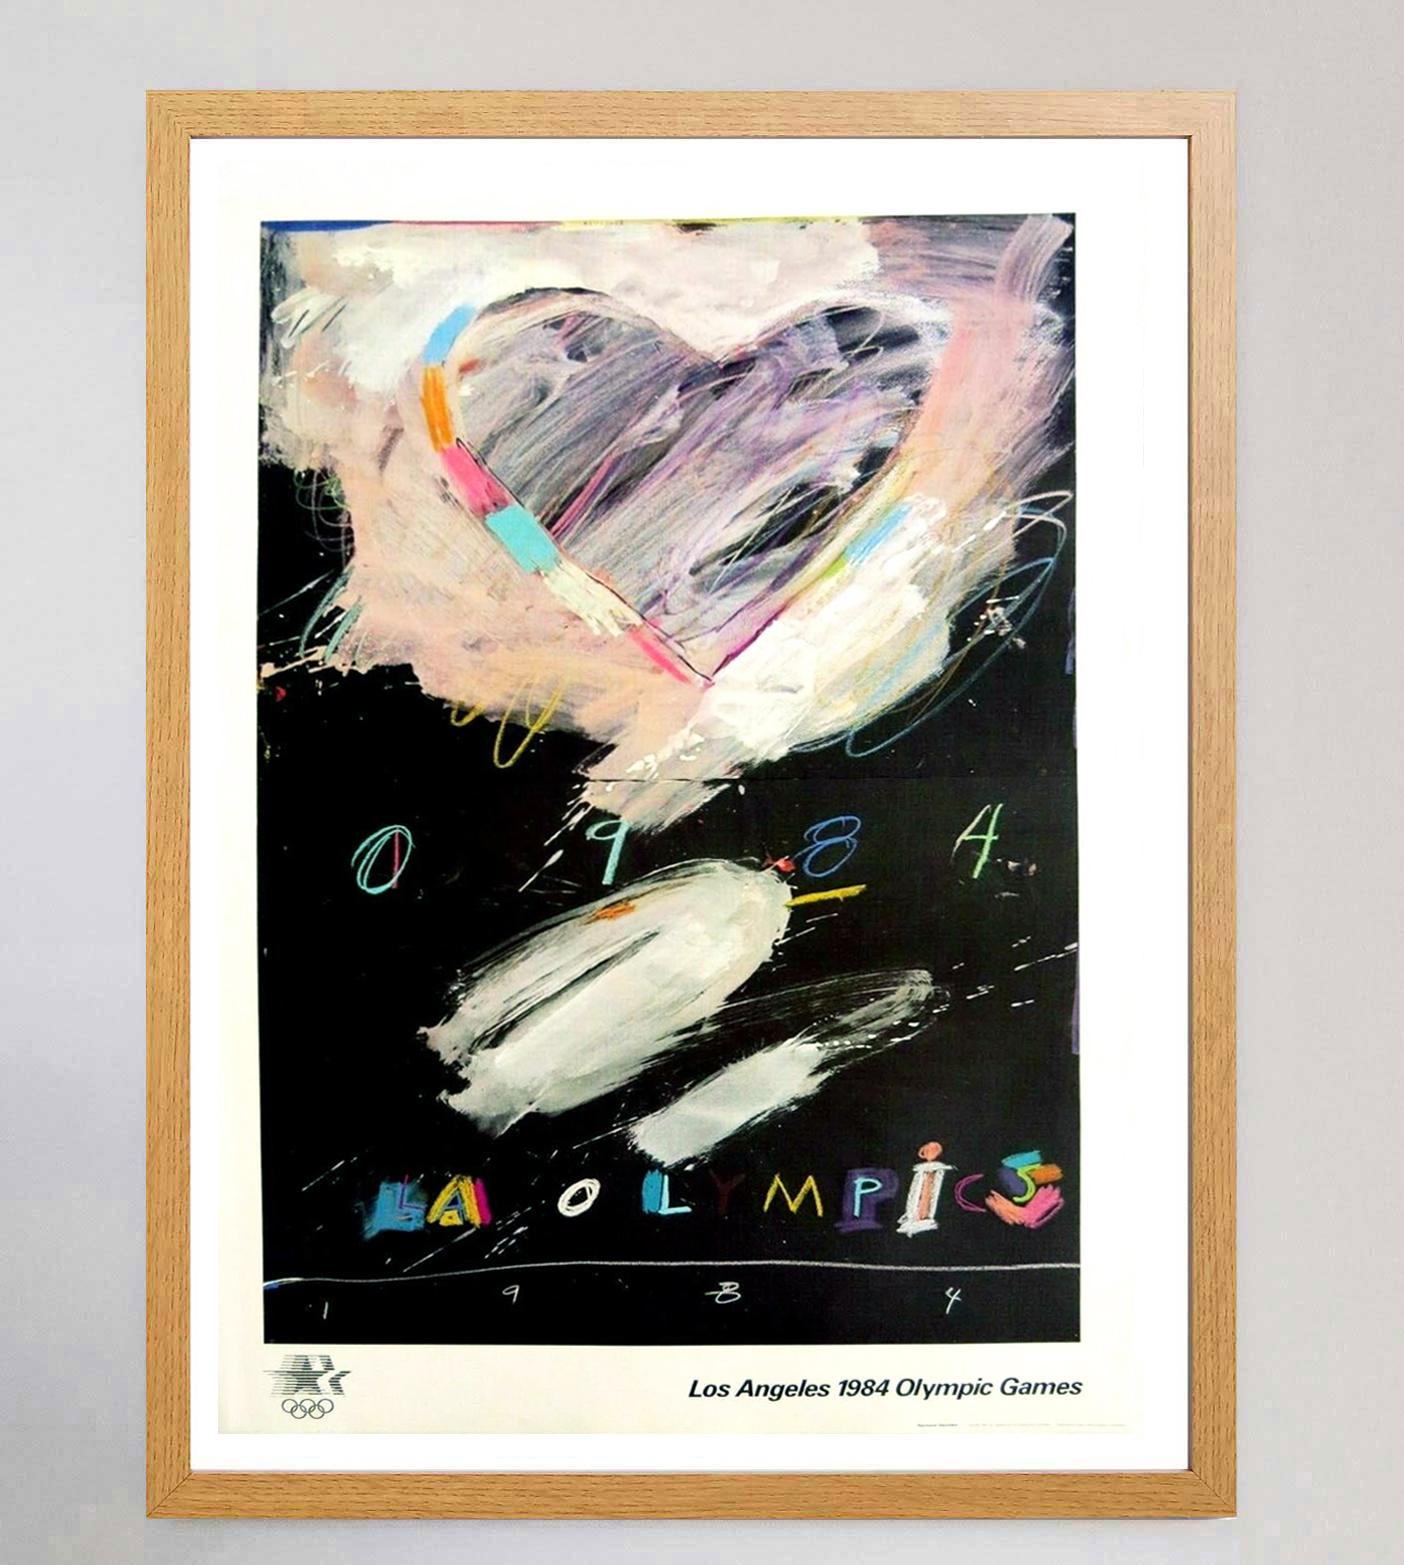 American 1984 Olympic Games Los Angeles - Raymond Saunders Original Vintage Poster For Sale